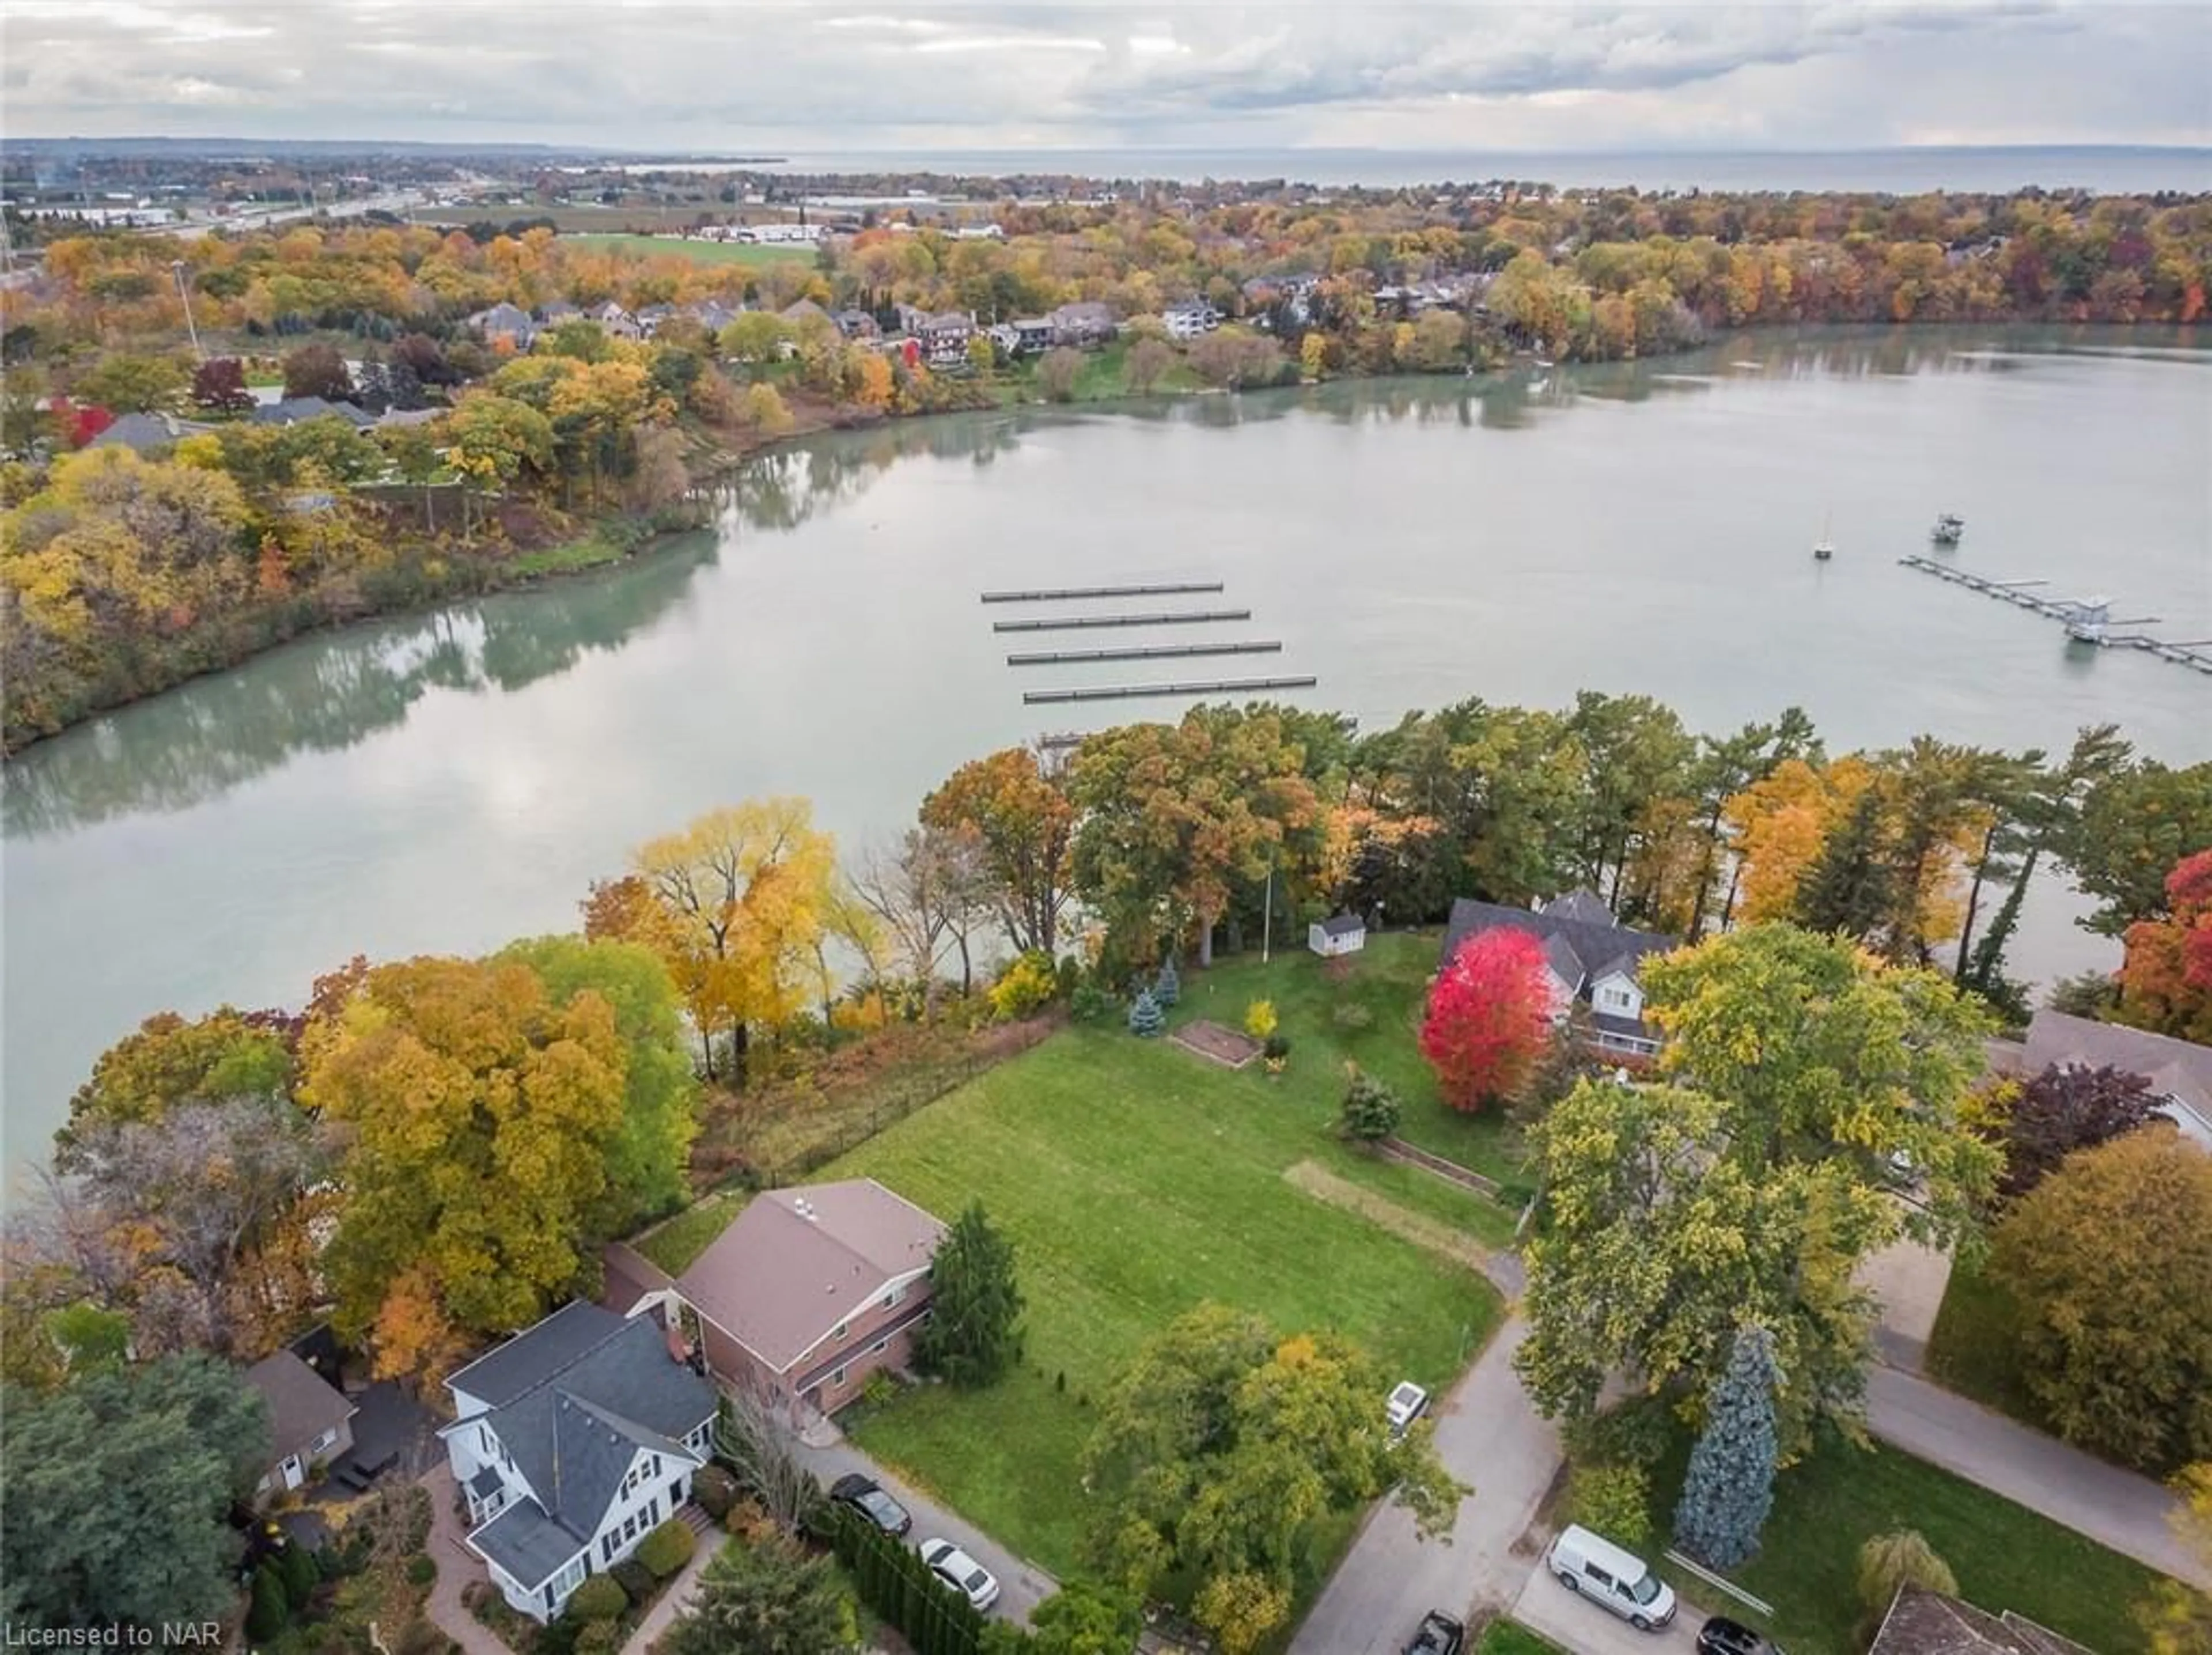 Lakeview for 56 Henley Dr, St. Catharines Ontario L2N 4A9